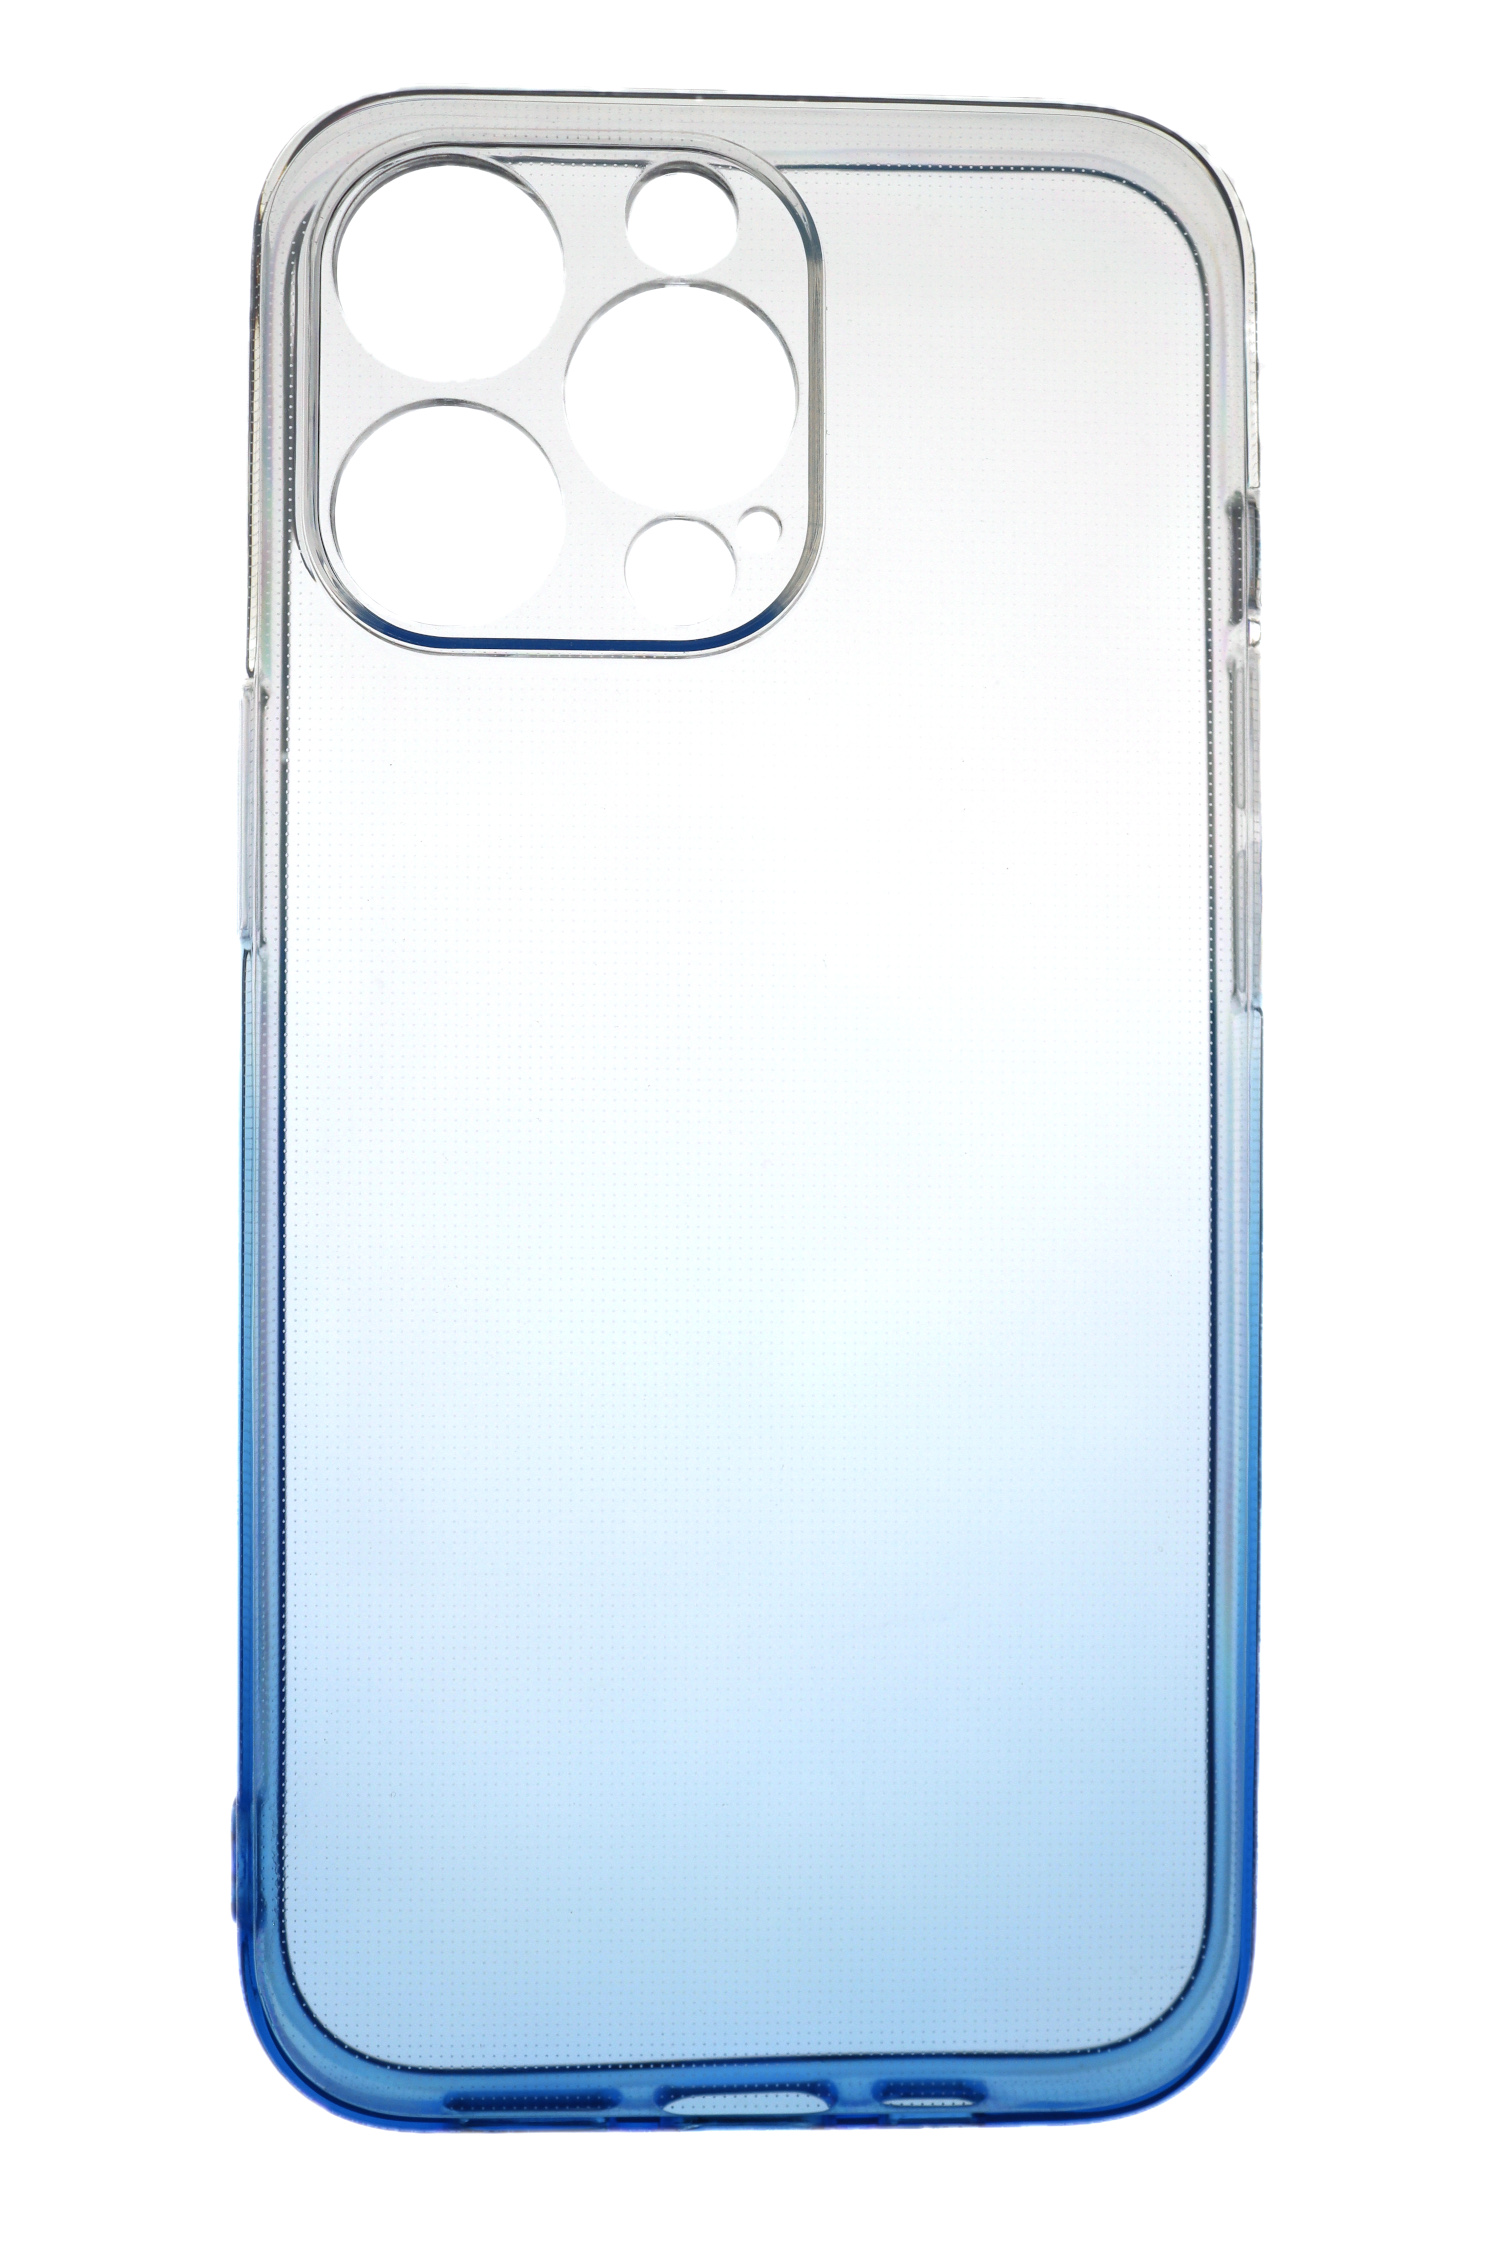 JAMCOVER 2.0 mm Strong, Apple, Transparent Max, TPU Blau, Backcover, Pro 14 Case iPhone